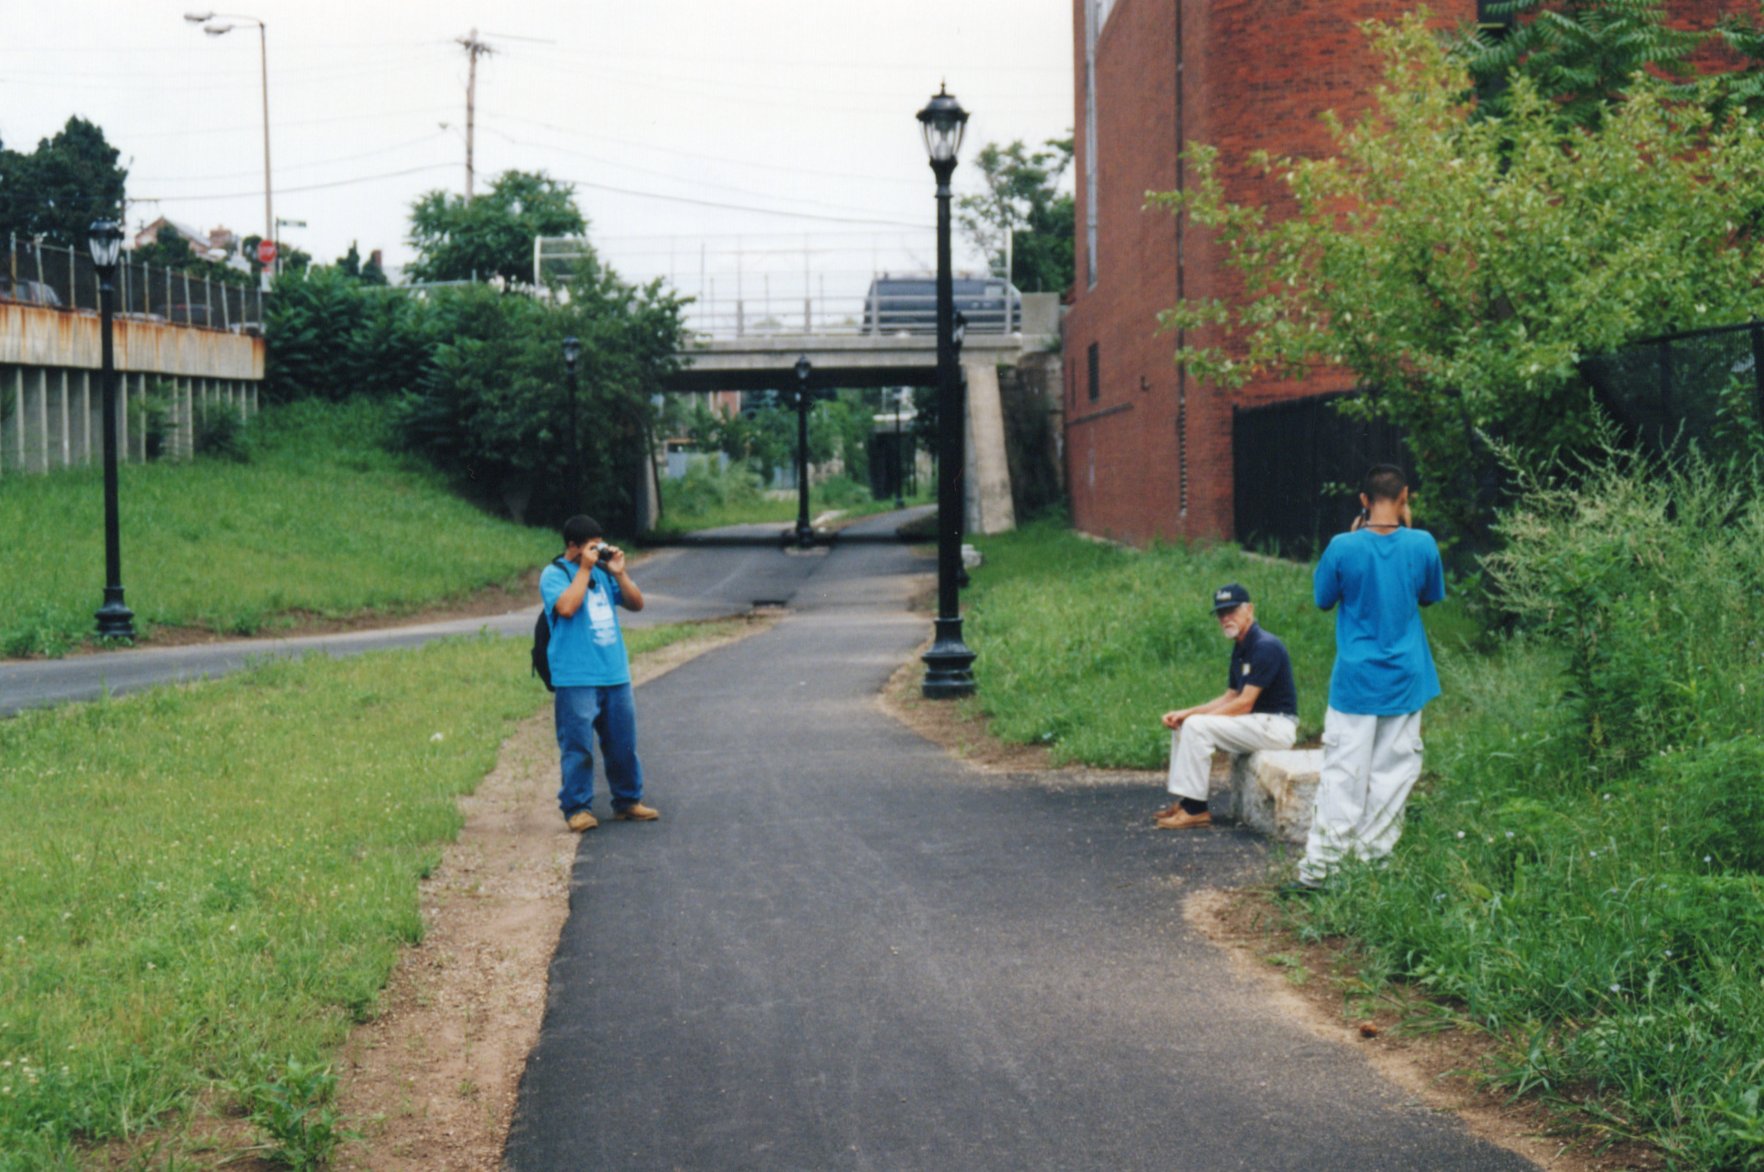 two young people take photos on the greenway